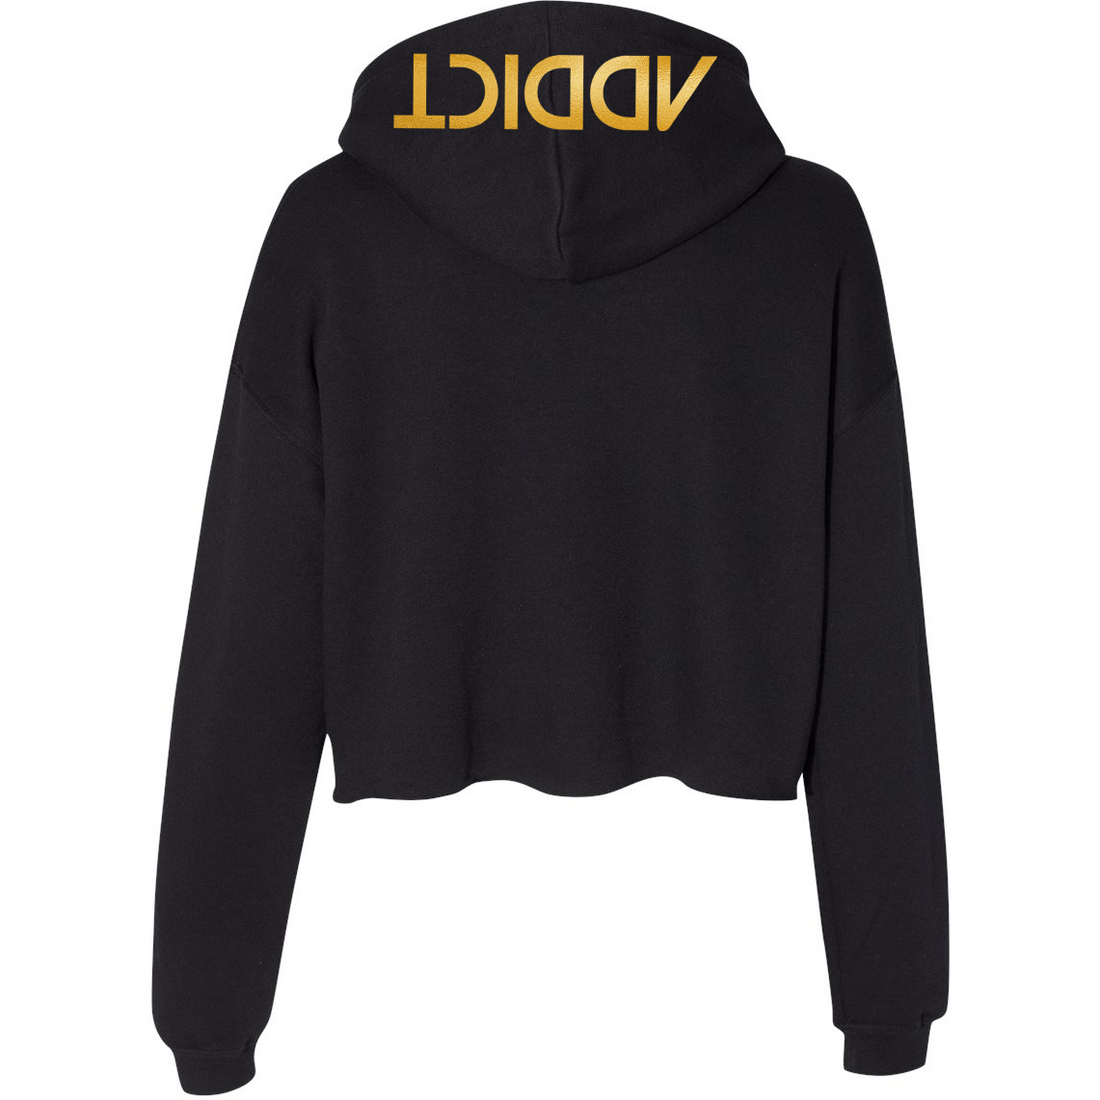 INK Gold Women's Cropped Hoodie